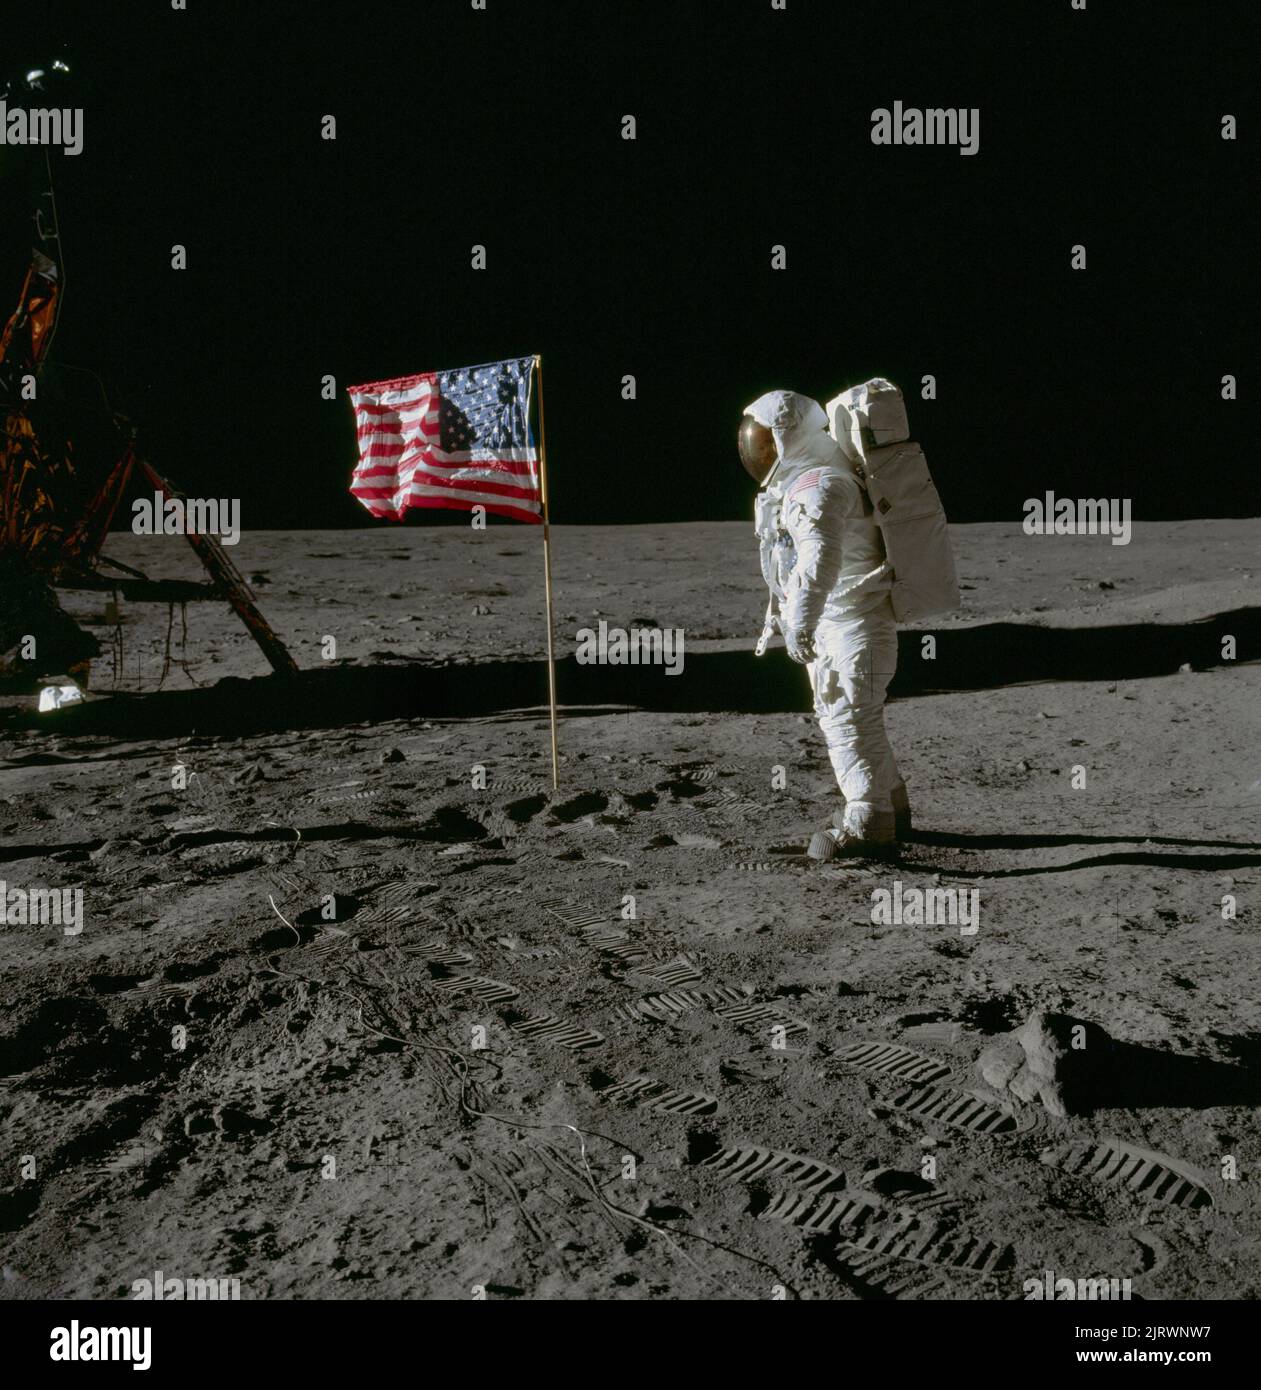 SEA OF TRANQUILITY, THE MOON, EARTH - 20 July 1969 - Astronaut Edwin E Aldrin Jr, lunar module pilot,  on the surface of the Moon with a US flag near Stock Photo